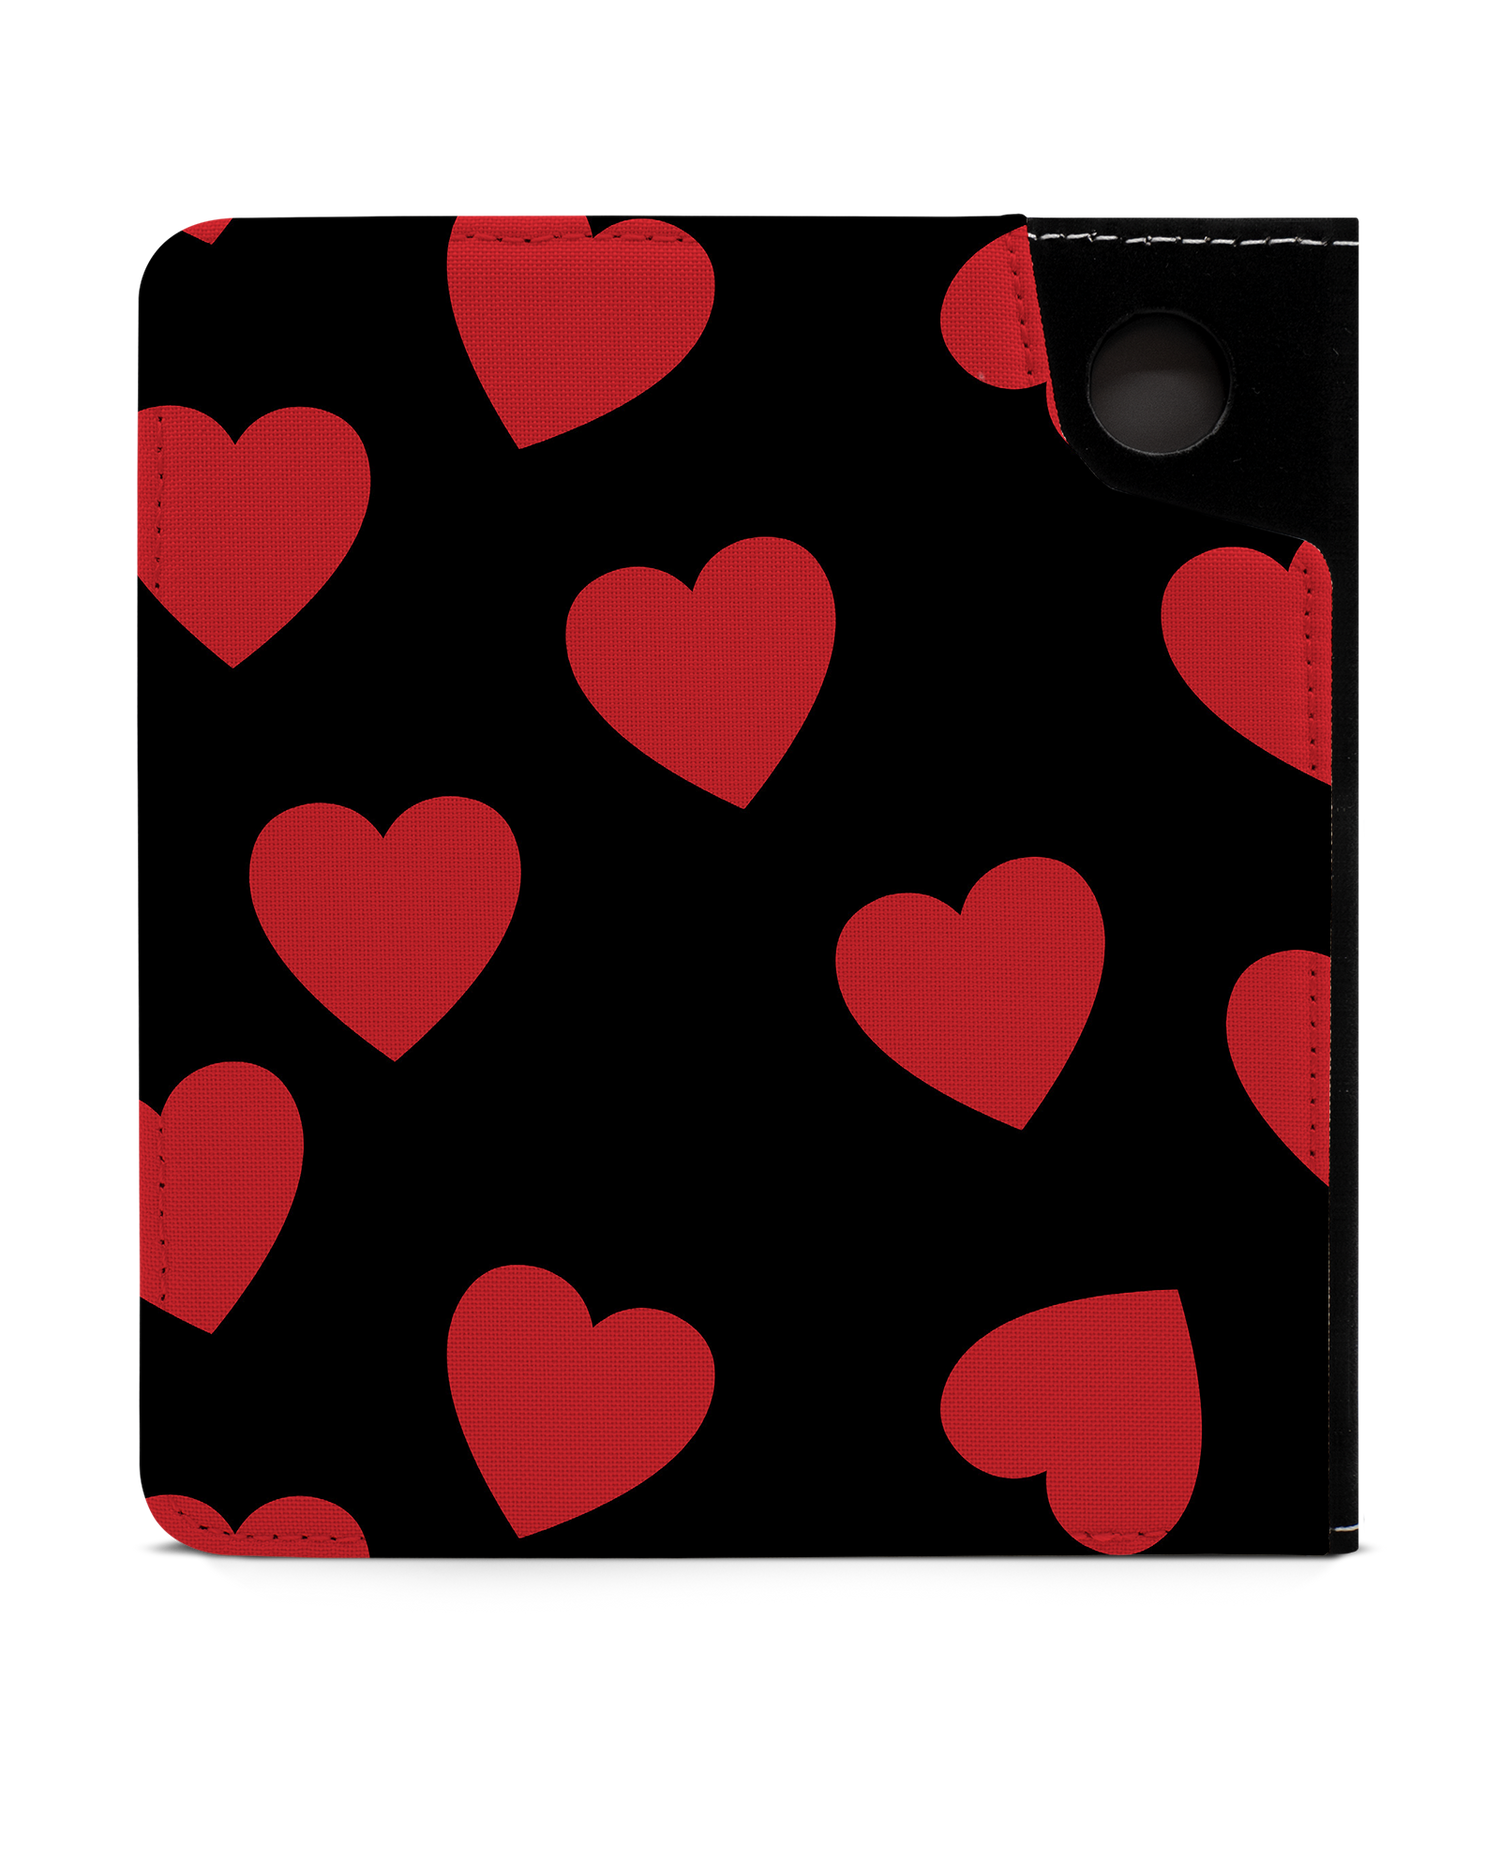 Repeating Hearts eReader Case for tolino vision 6: Back View